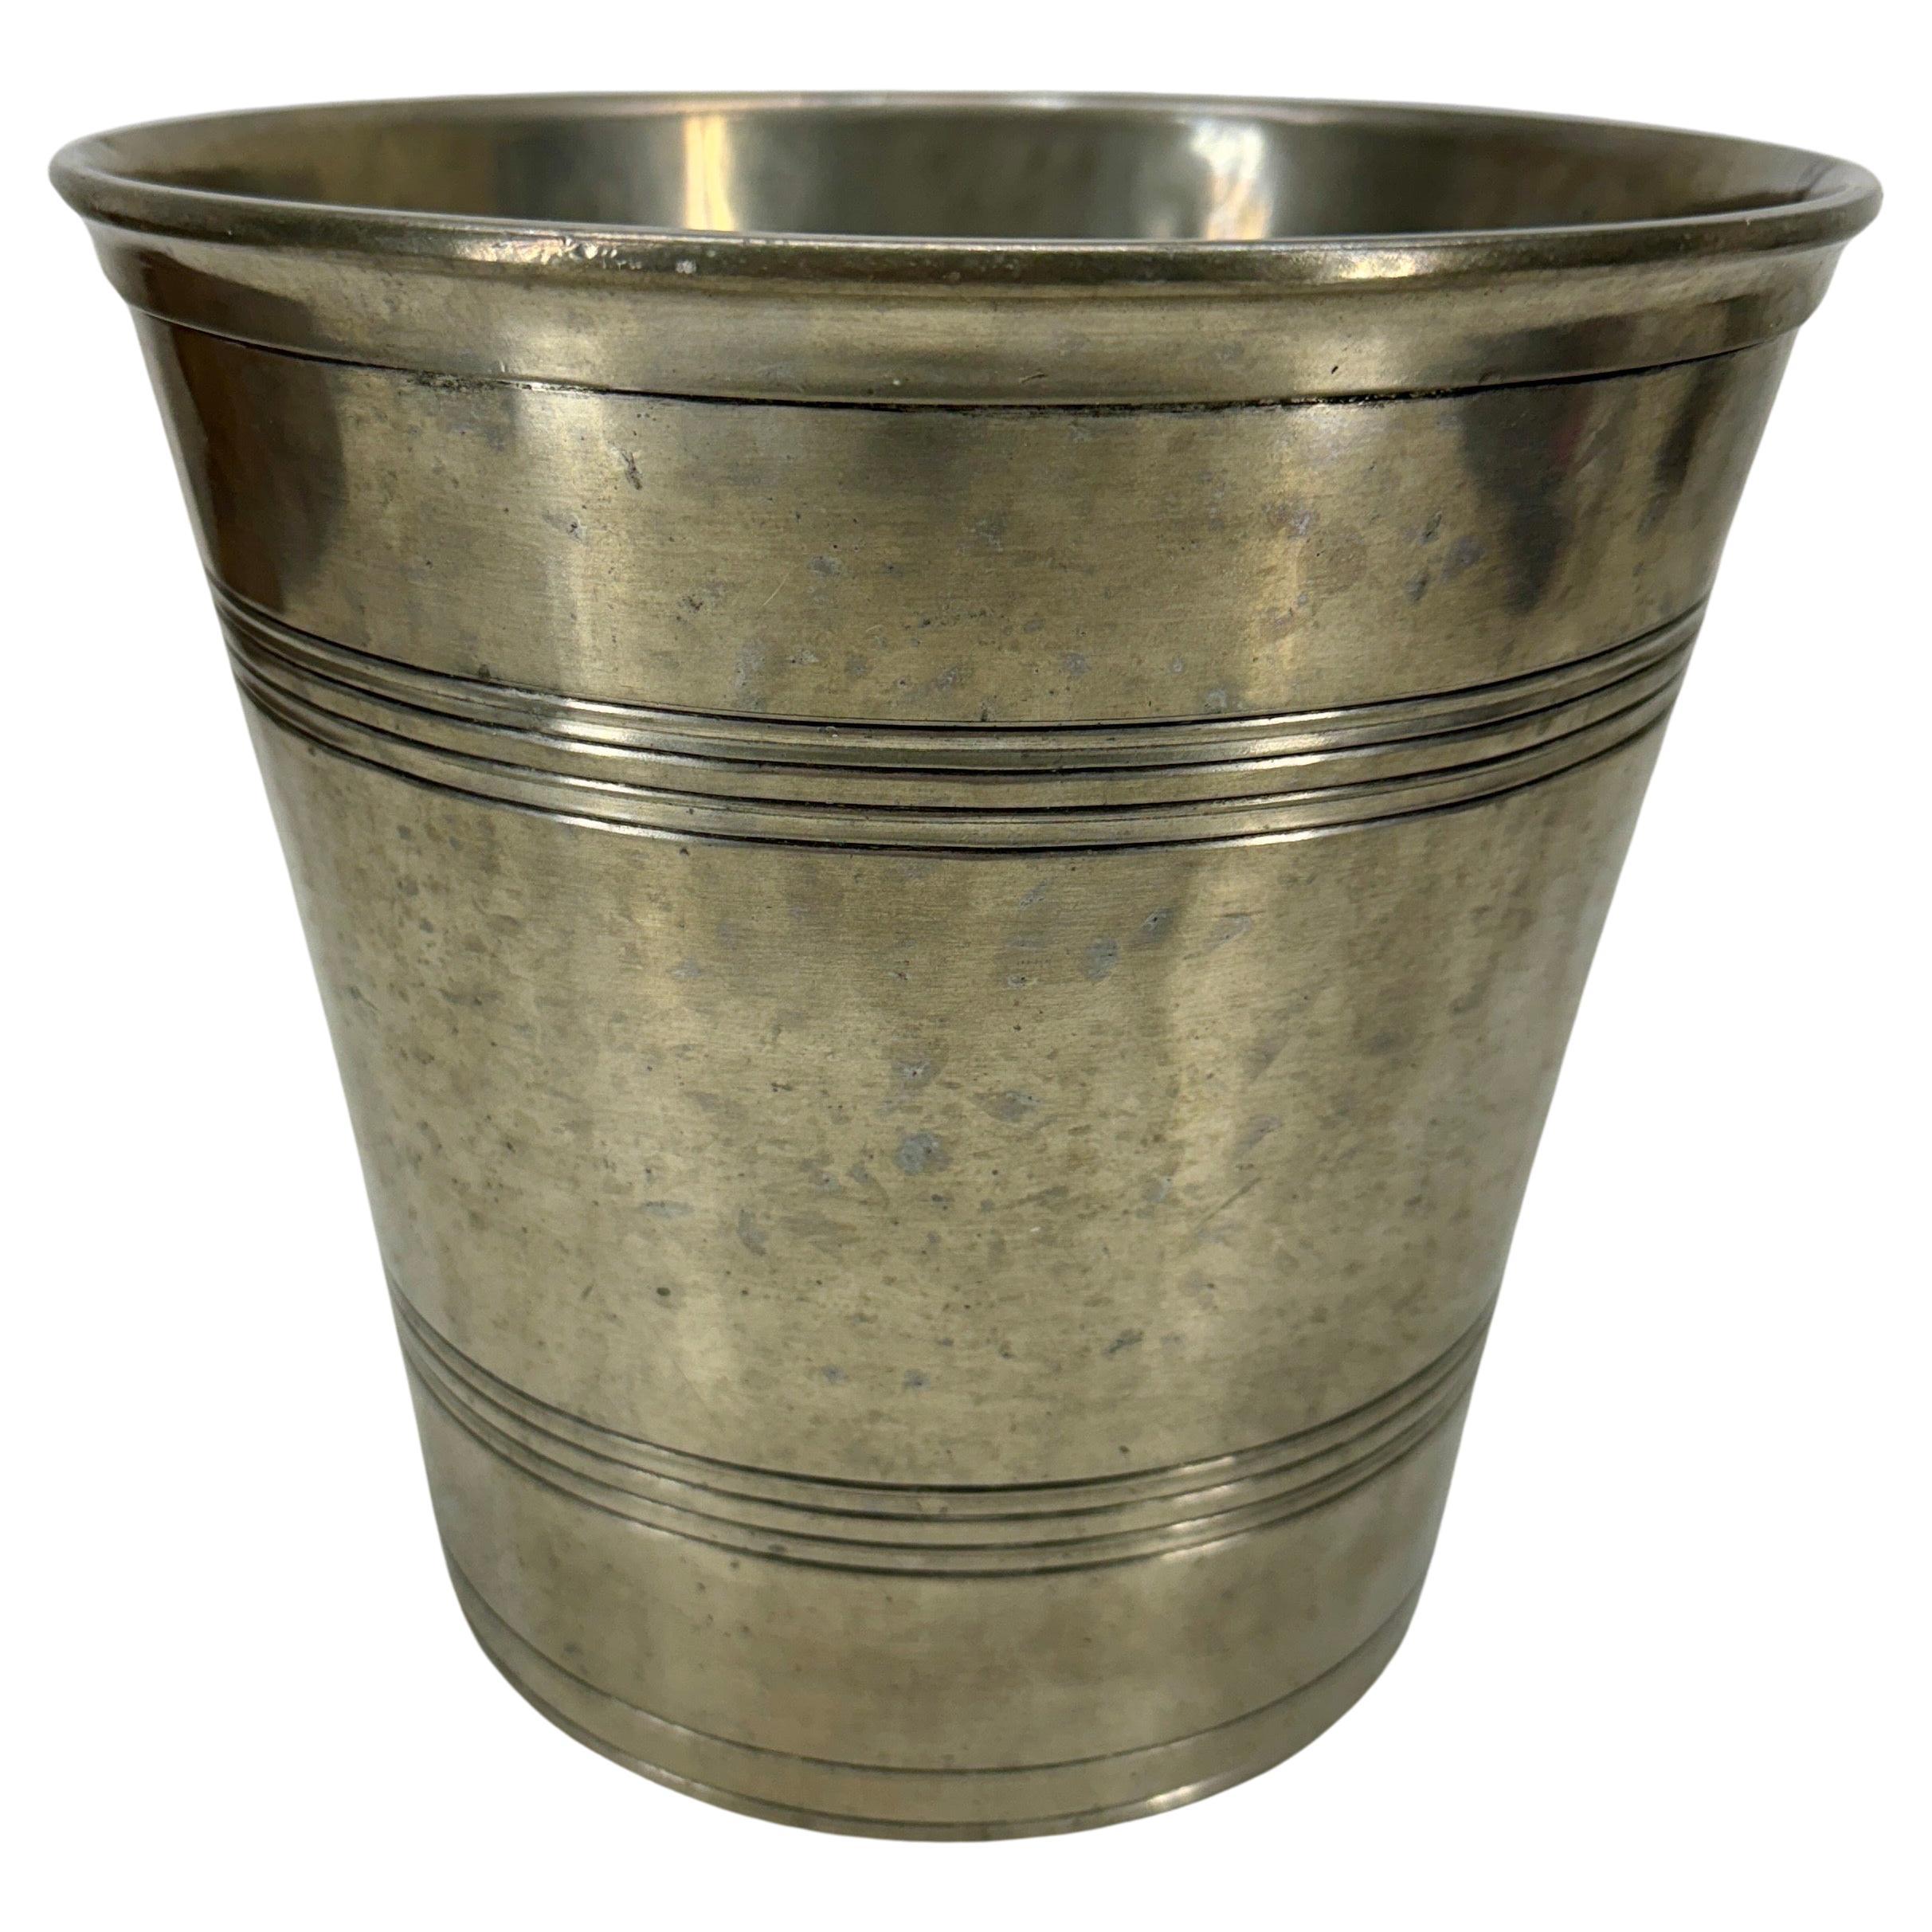 The versatile large Match Pewter Champagne Wine Ice Bucket Cooler or Wastebasket is sure to catch the eye and elevate whatever space you place it in. Each Match piece is handmade in Italy, using techniques that are hundreds of years old. This